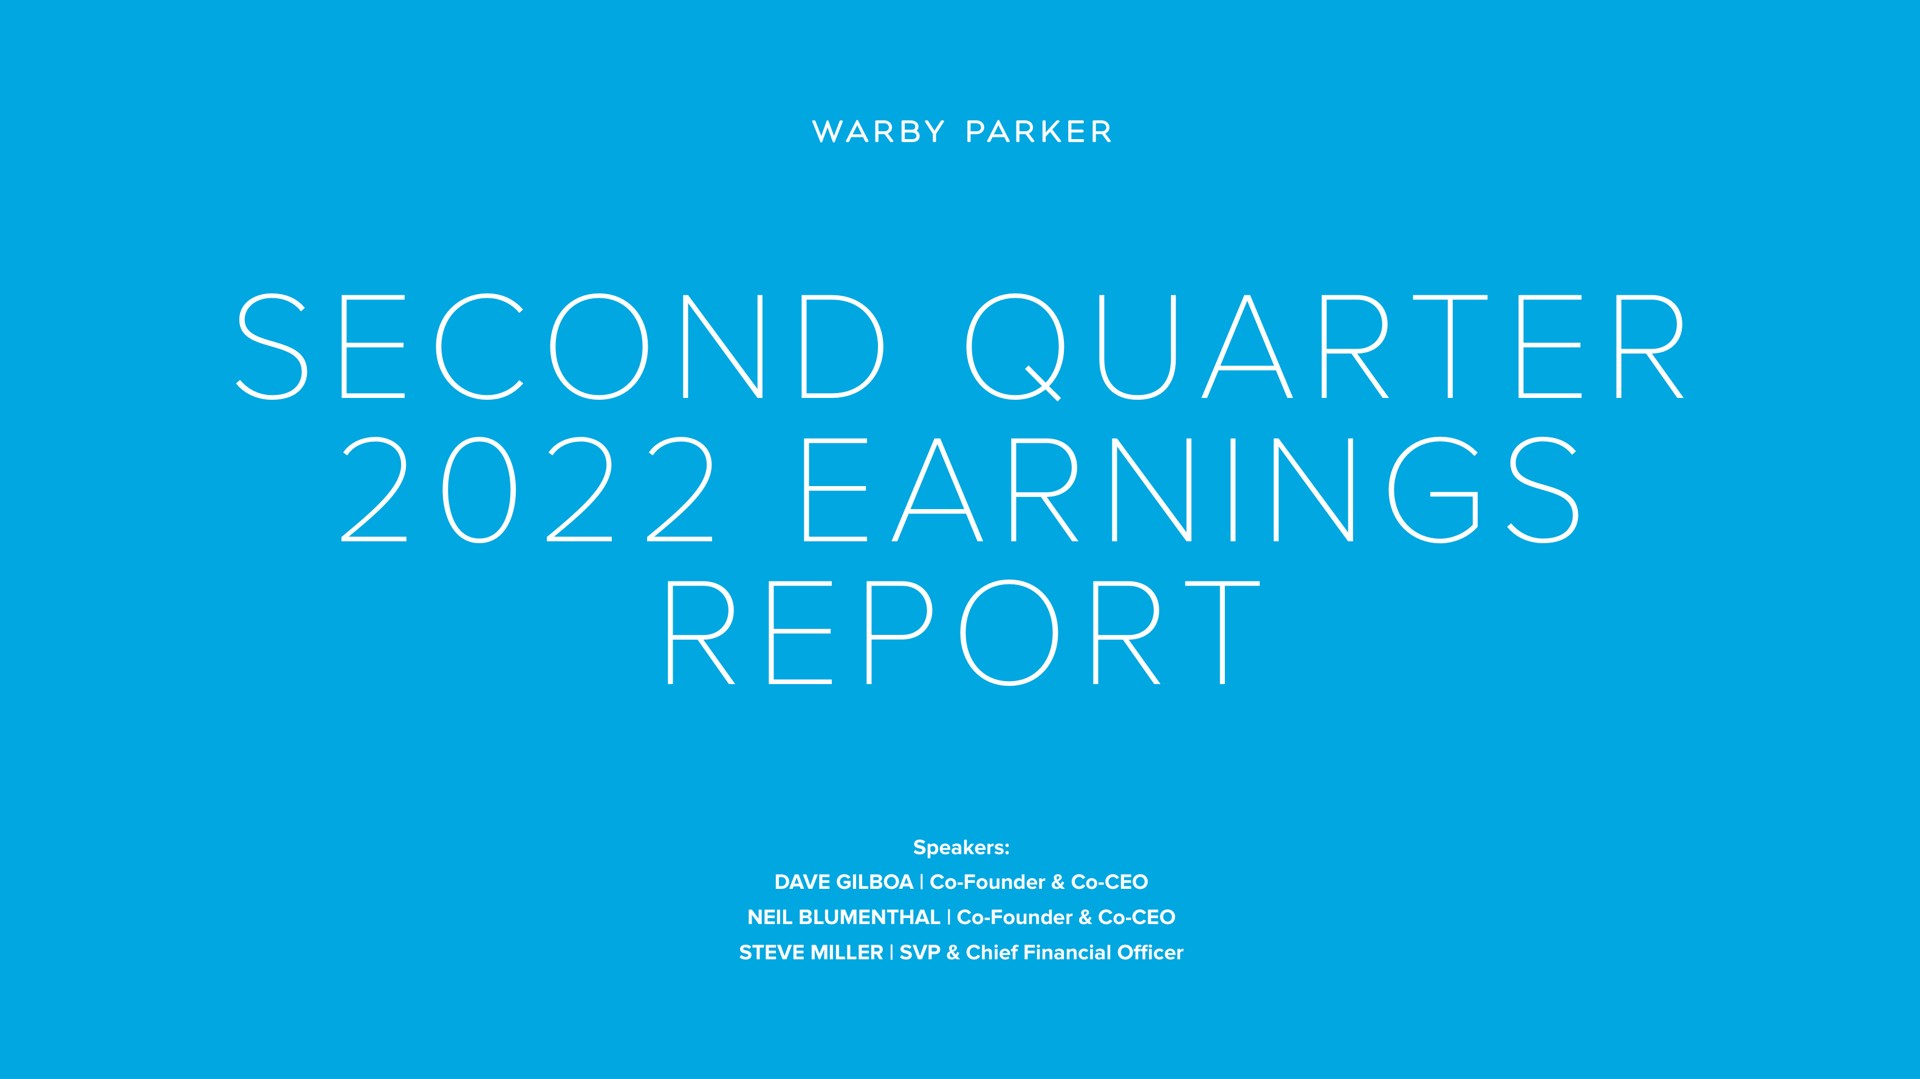 second quarter earnings report parker founder founder miller chief financial officer | Warby Parker